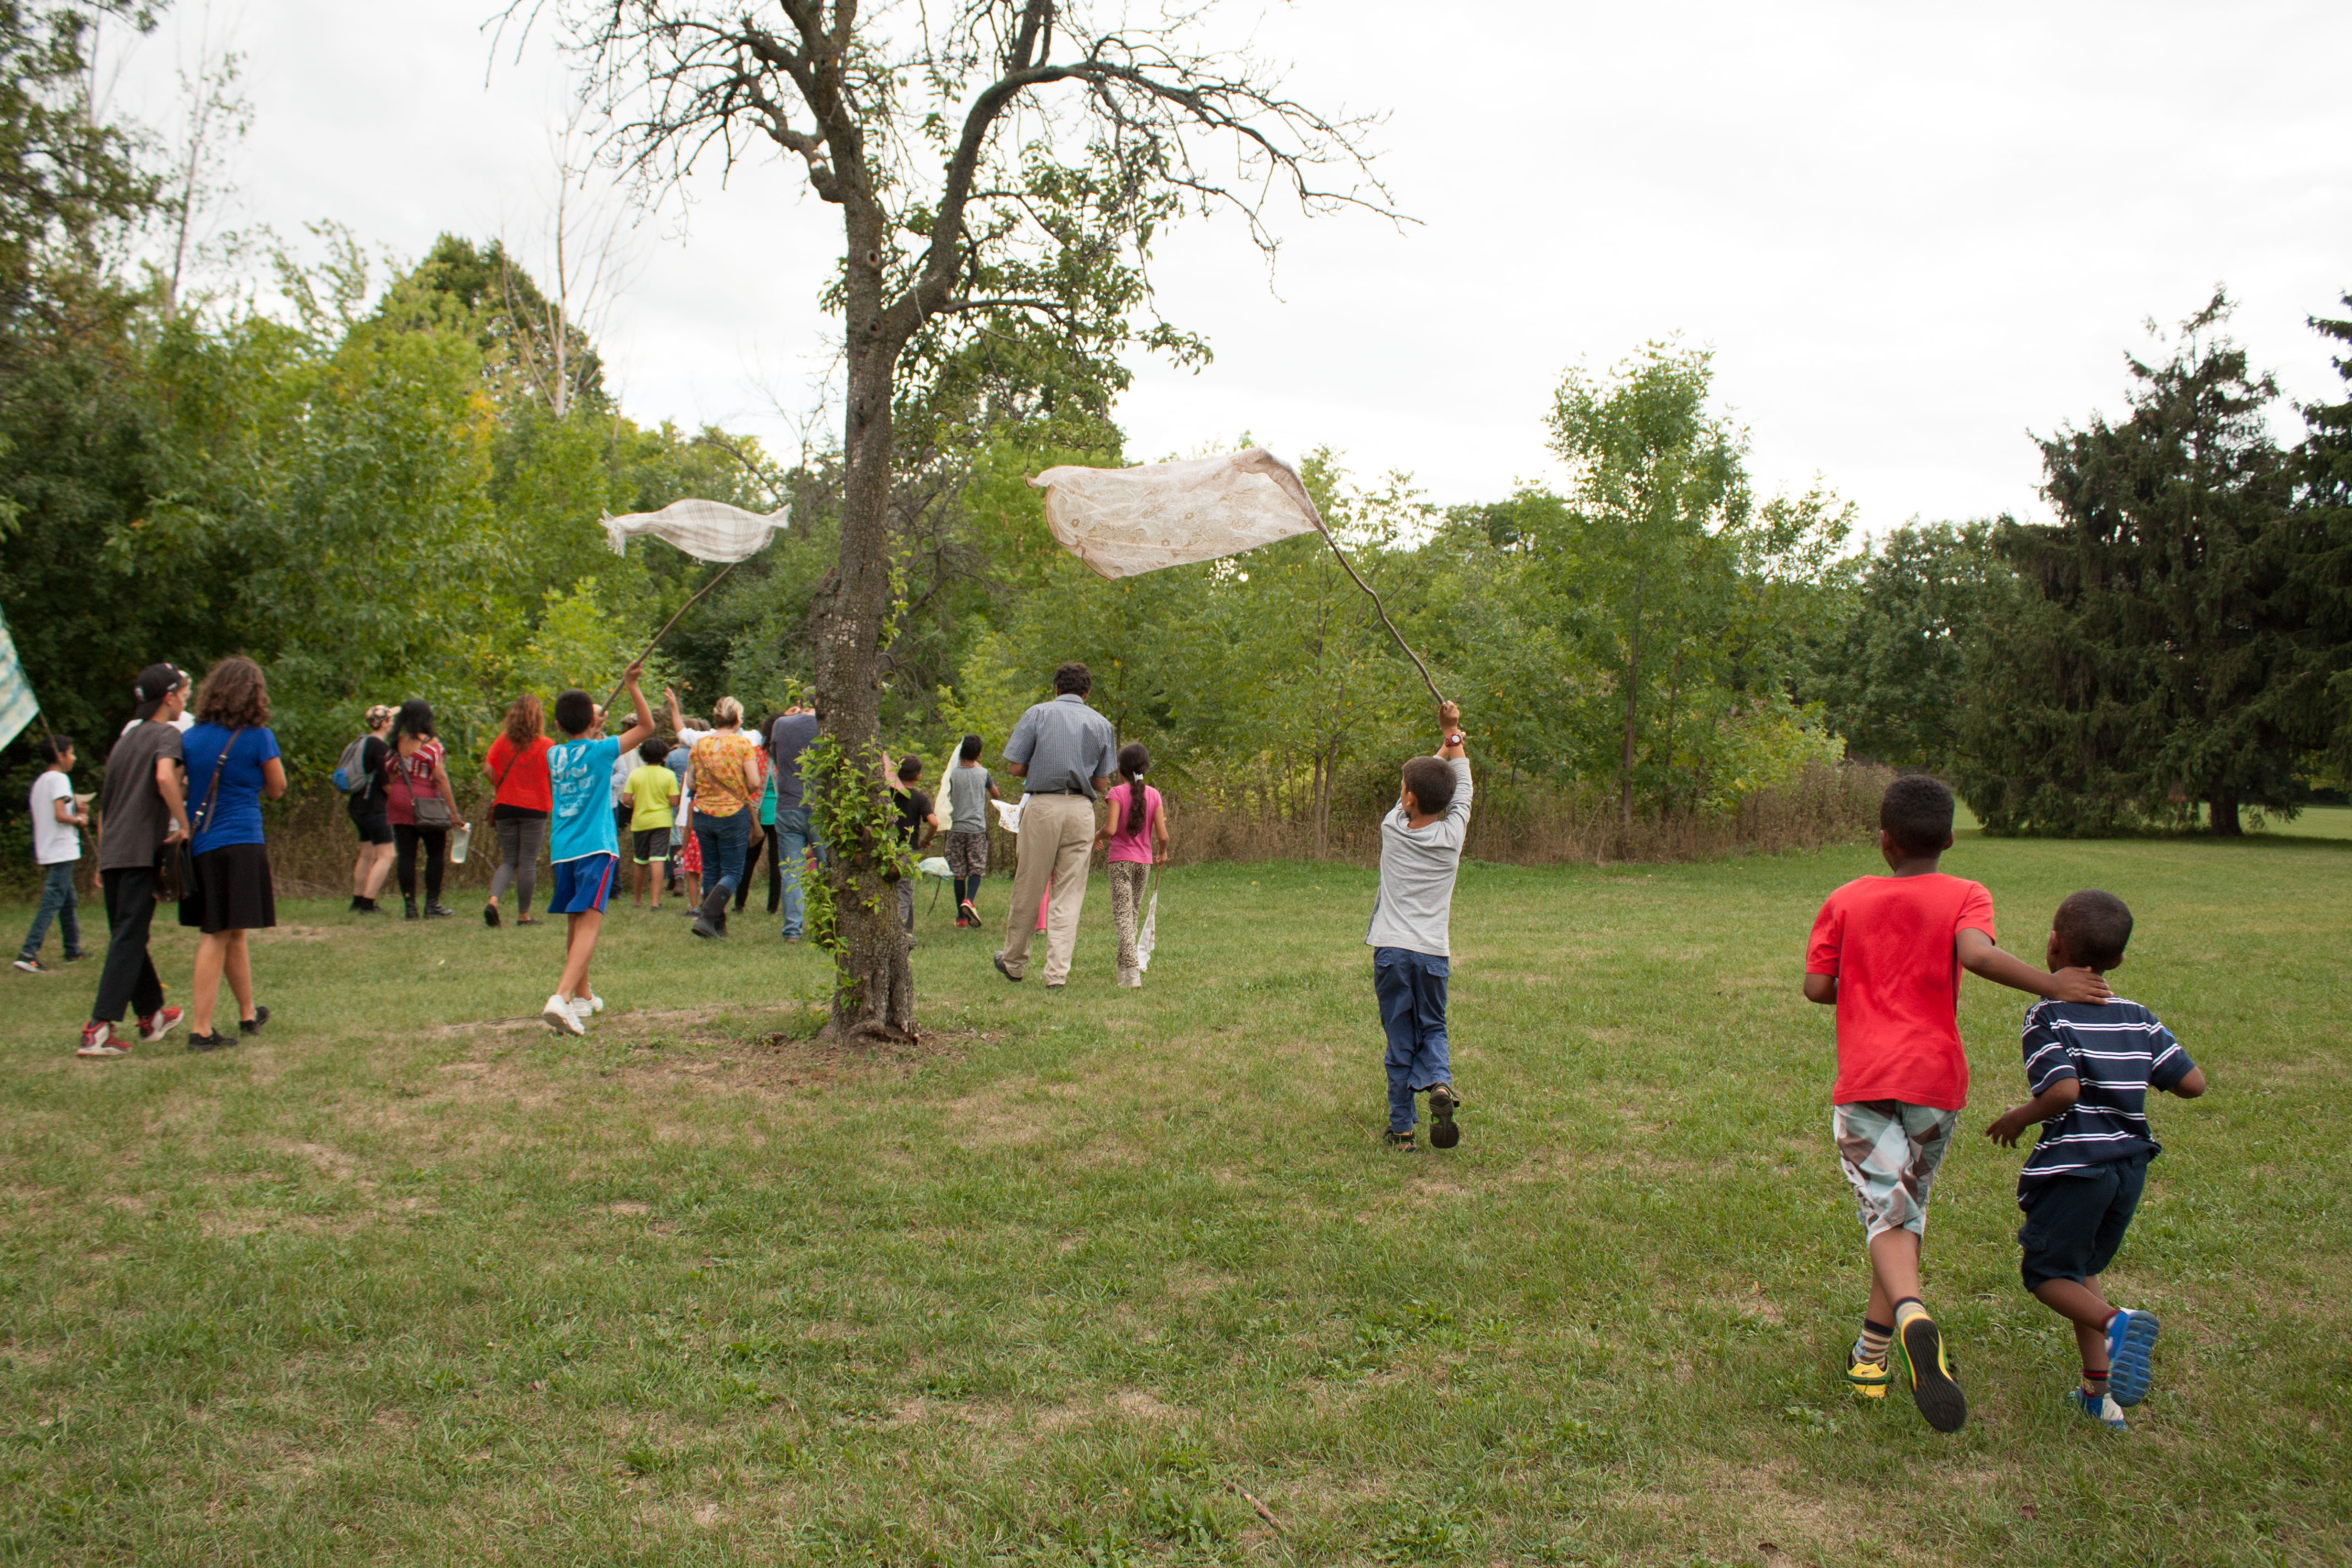 A large group of children walk through a field into a wooded area.